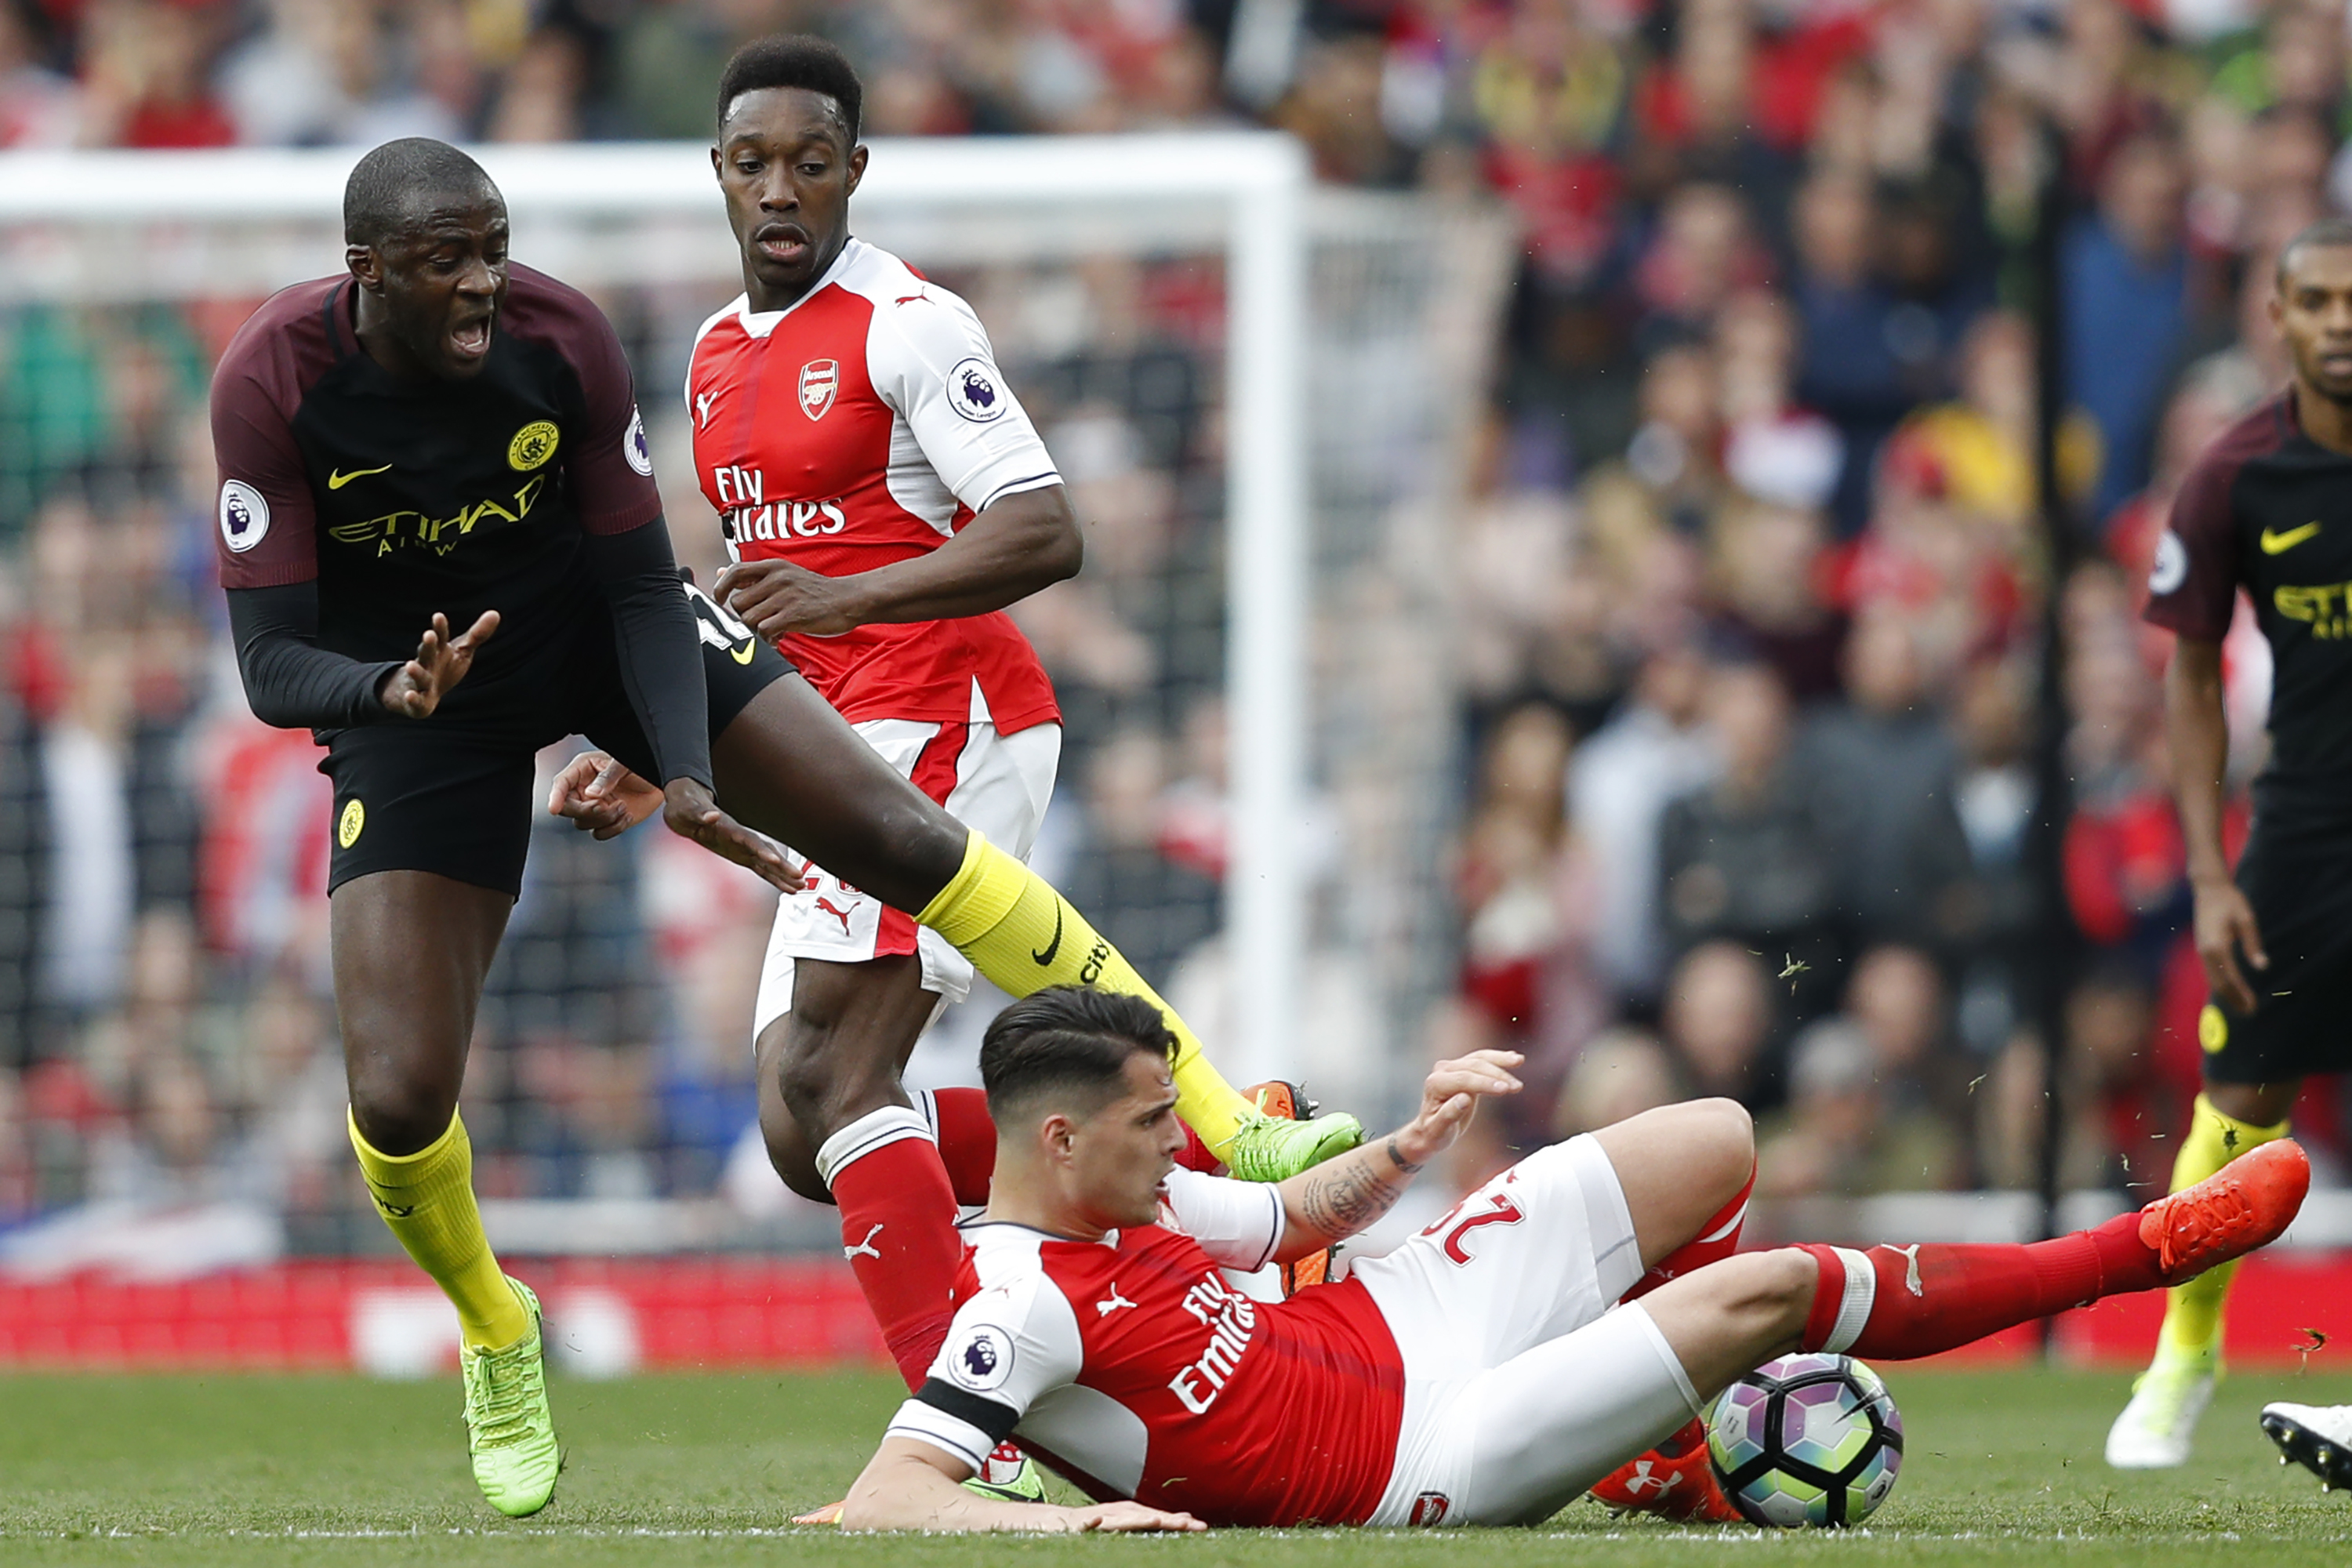 Arsenal's Swiss midfielder Granit Xhaka (R) tackles Manchester City's Ivorian midfielder Yaya Toure during the English Premier League football match between Arsenal and Manchester City at the Emirates Stadium in London on April 2, 2017.  / AFP PHOTO / Adrian DENNIS / RESTRICTED TO EDITORIAL USE. No use with unauthorized audio, video, data, fixture lists, club/league logos or 'live' services. Online in-match use limited to 75 images, no video emulation. No use in betting, games or single club/league/player publications.  /         (Photo credit should read ADRIAN DENNIS/AFP/Getty Images)